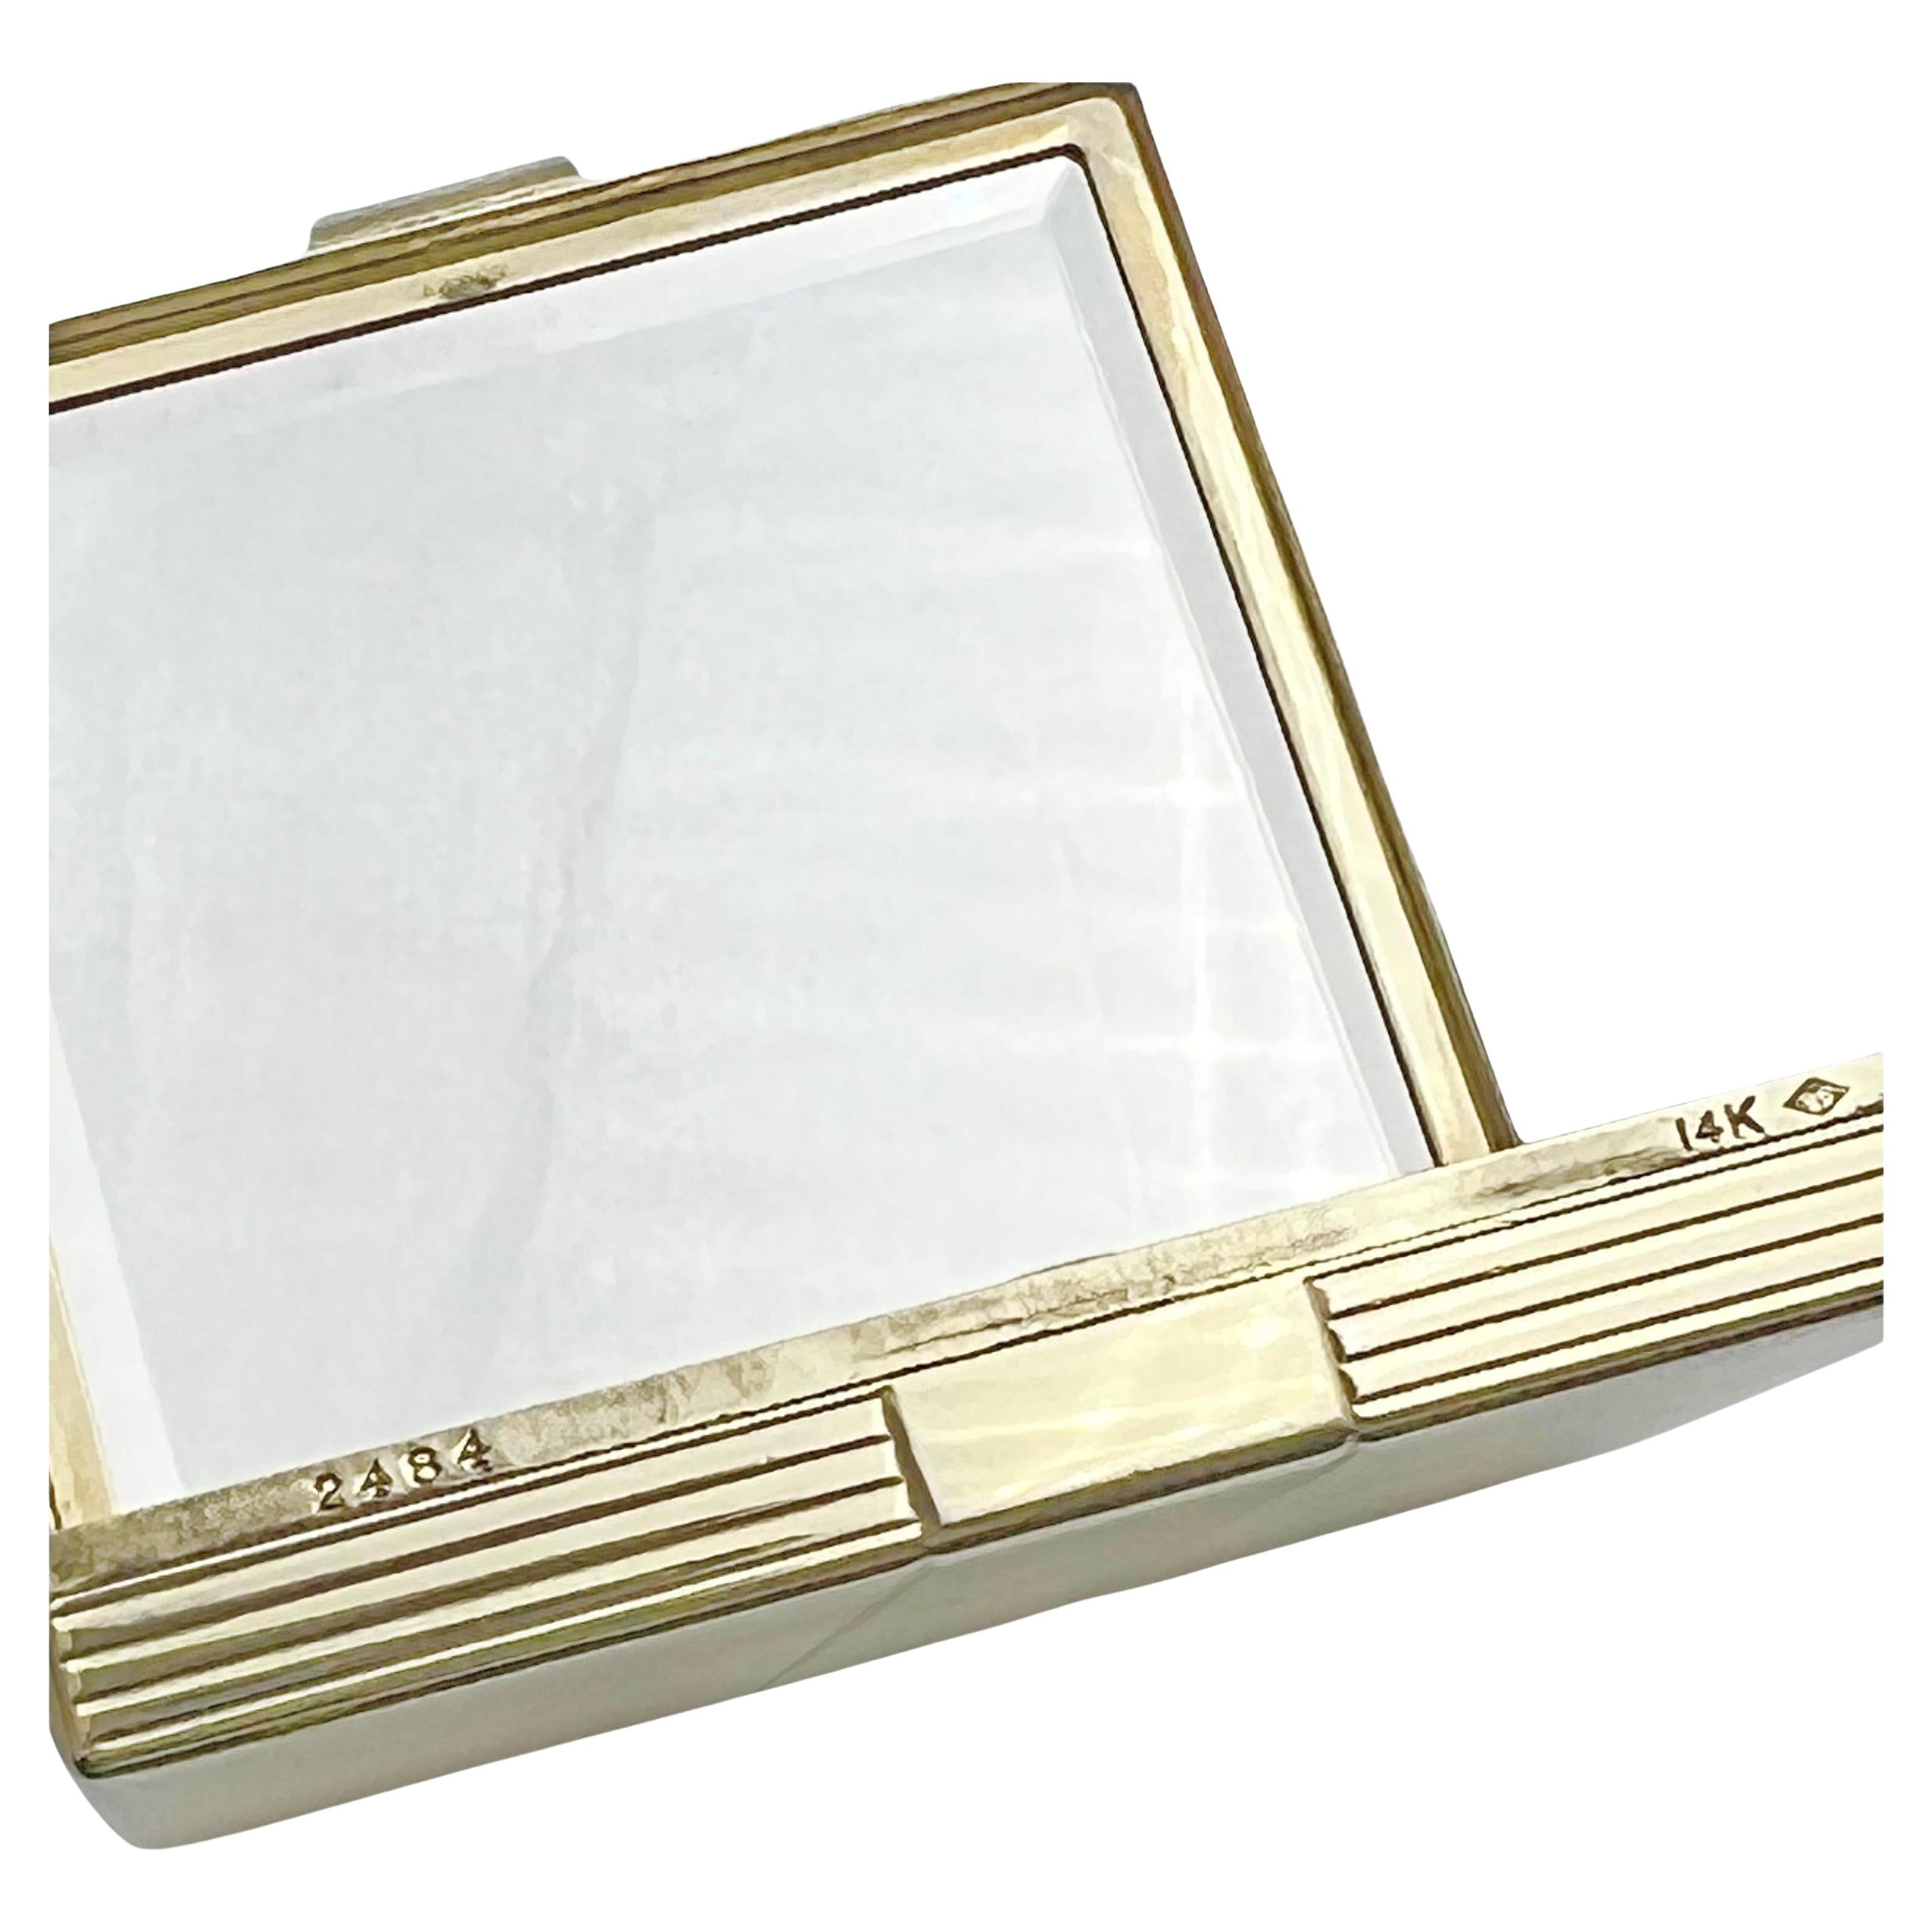 Cartier Art Deco Gold Sapphire Diamond Compact In Excellent Condition For Sale In Palm Beach, FL